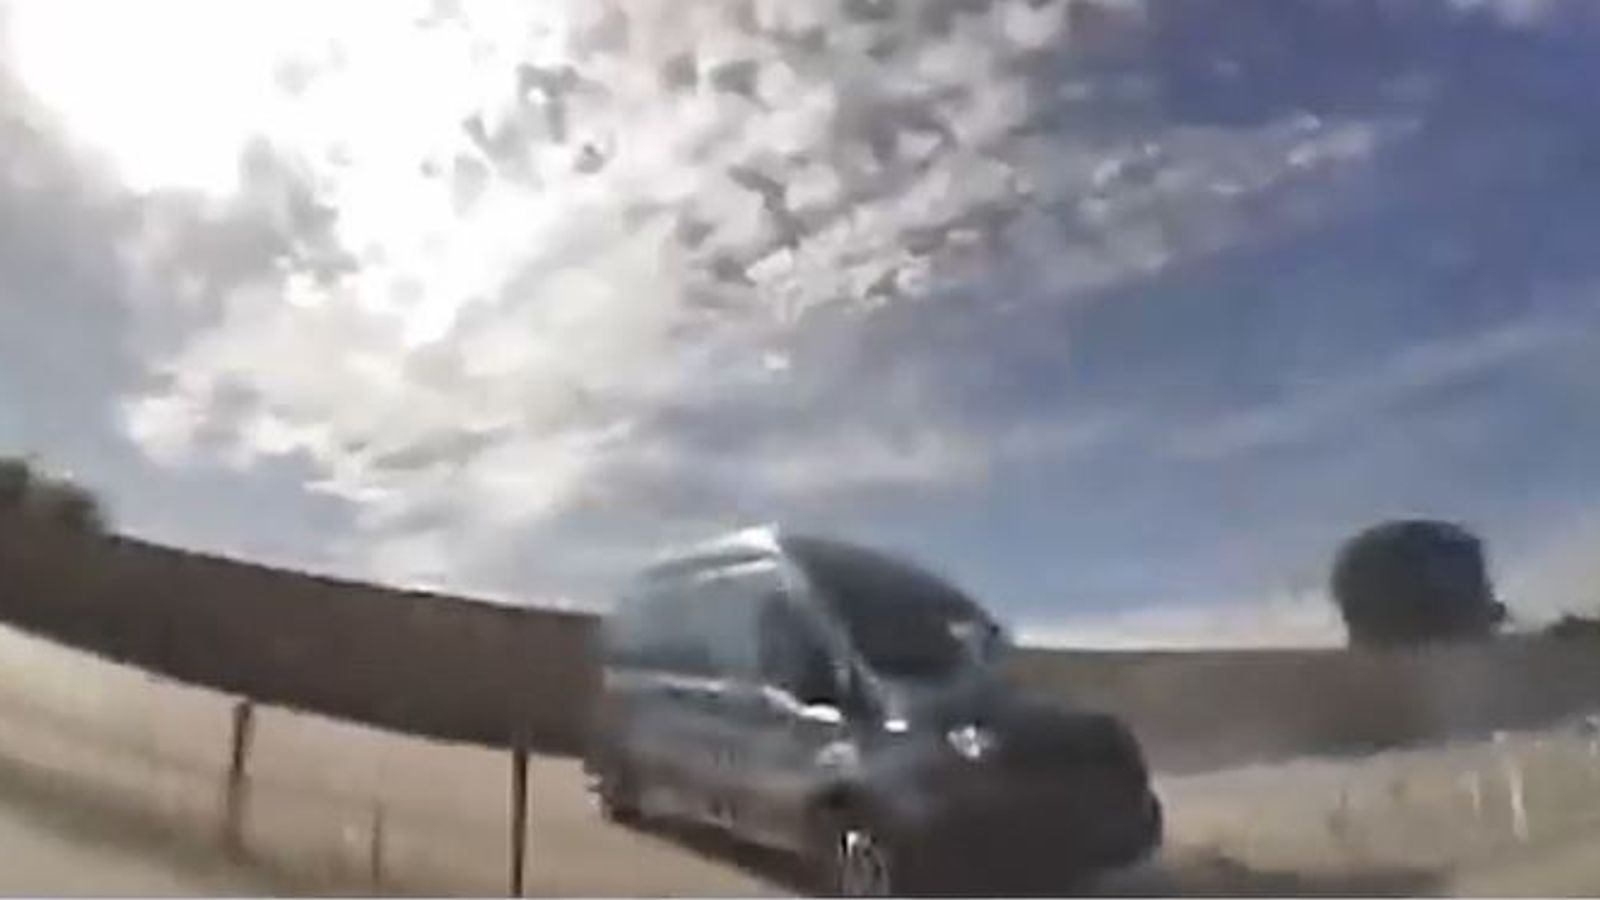 Police dashcam footage shows officers smash into Amazon van during high-speed chase in Florida